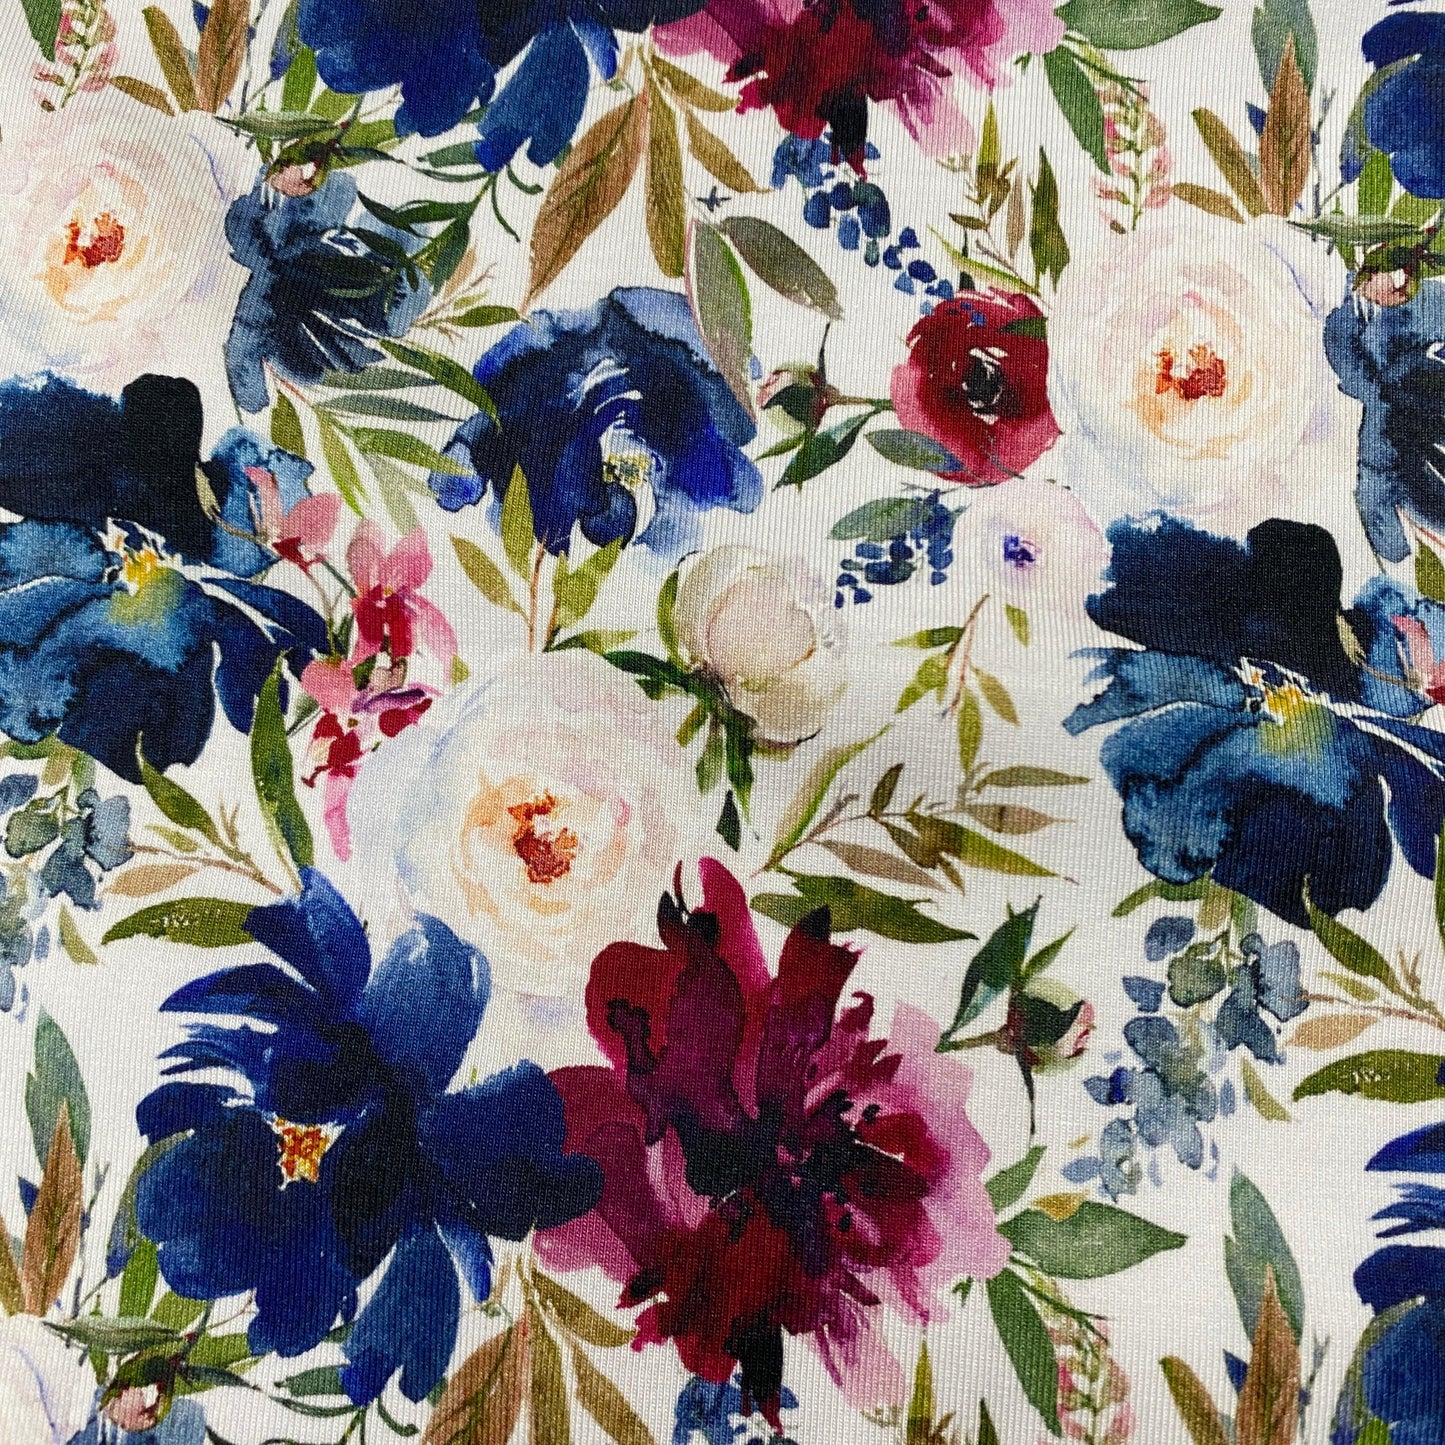 Red and Blue Flowers on Bamboo/Spandex Jersey Fabric - Nature's Fabrics